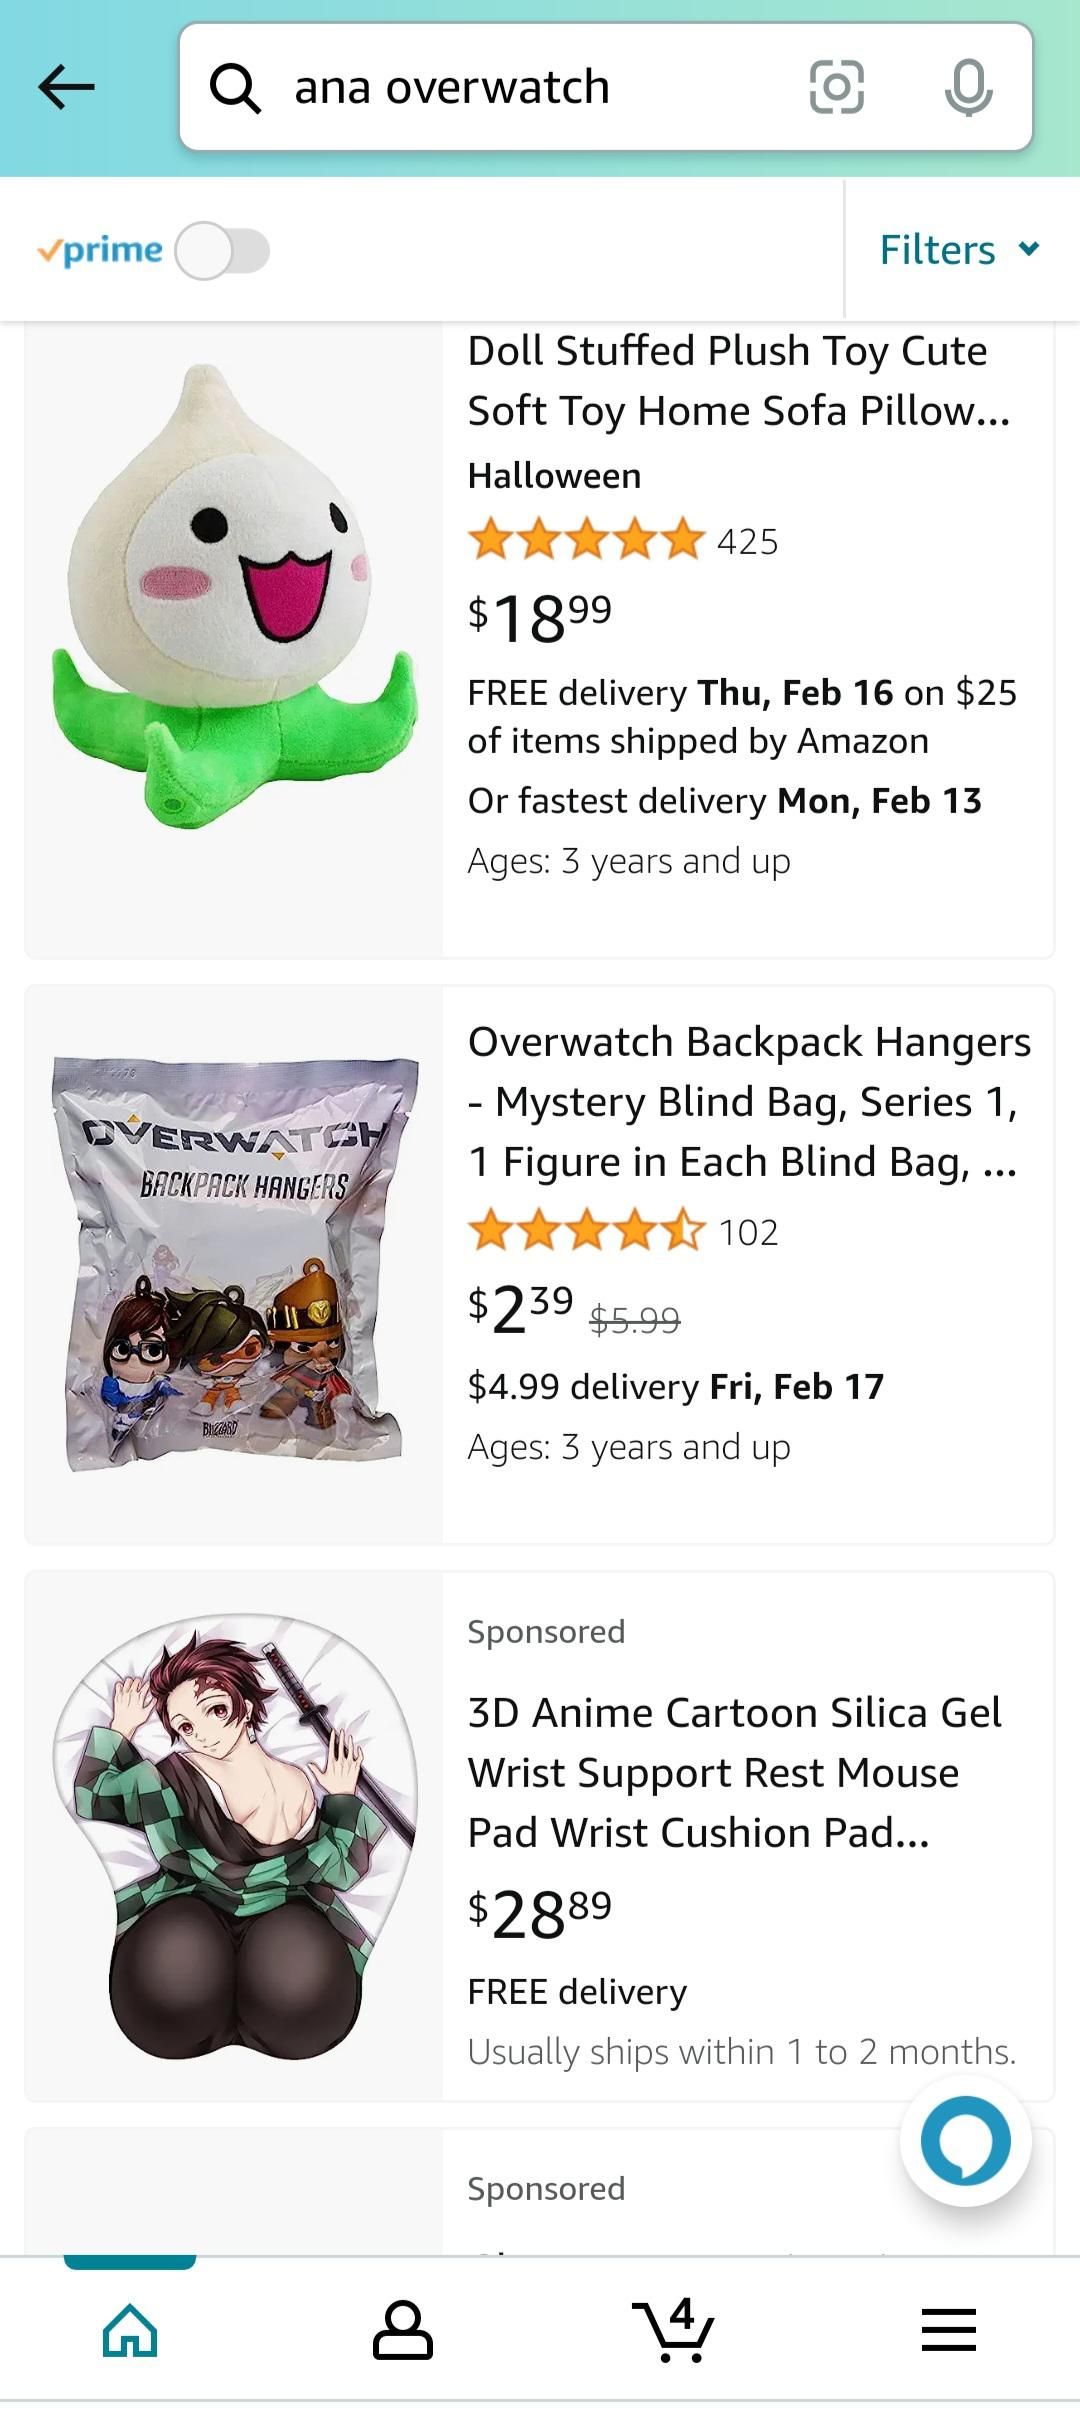 Was searching for overwatch merch for a friend's birthday, but I think I found something better!